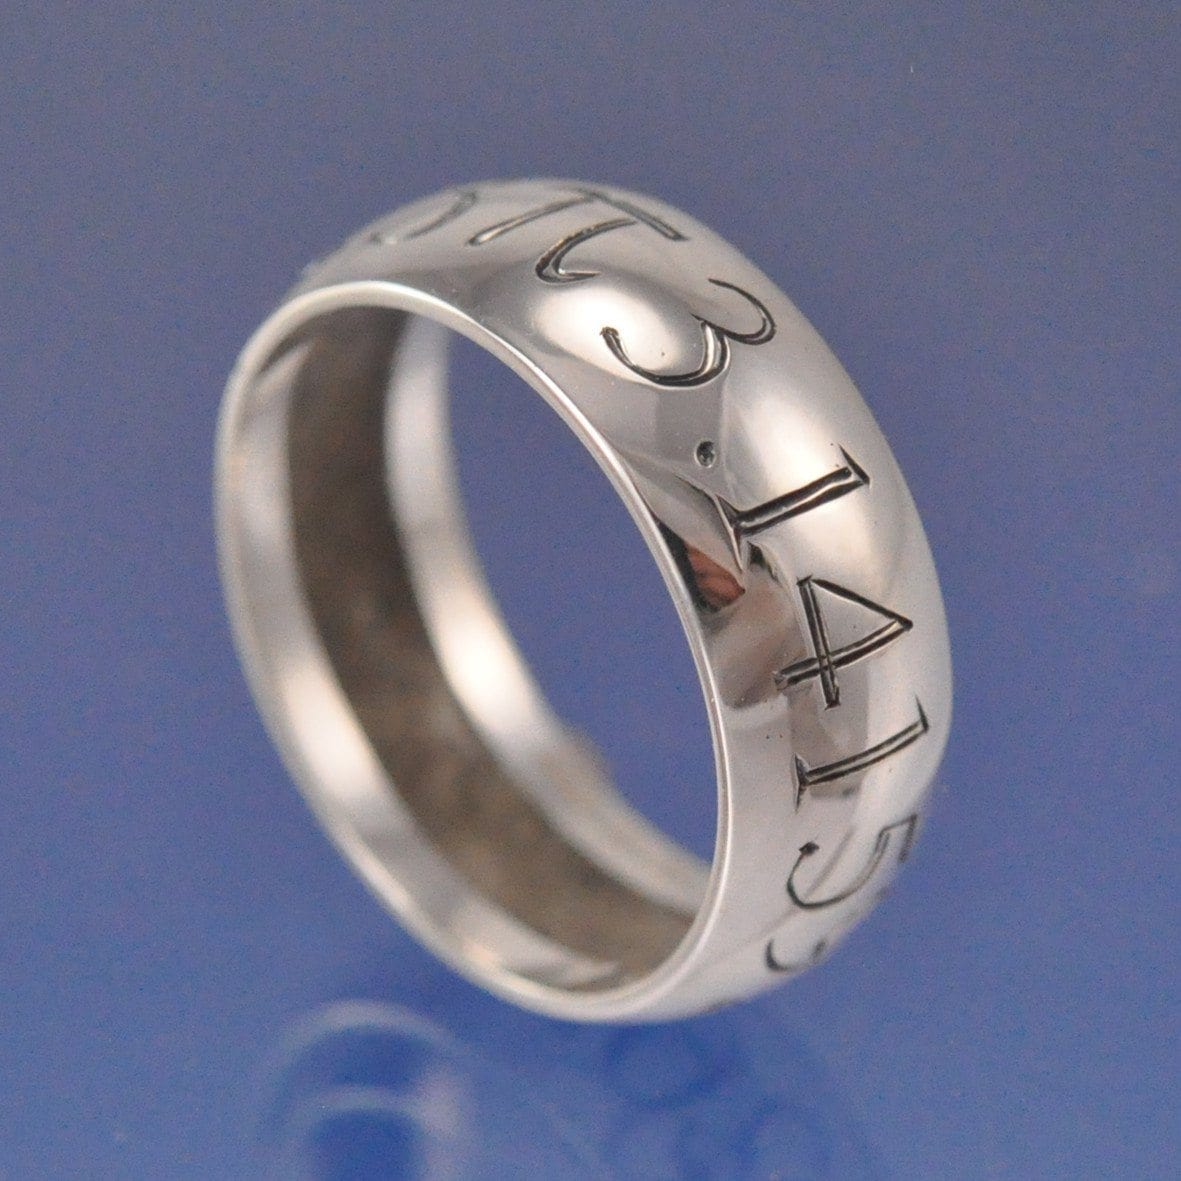 Cremation Ash Ring. Hidden 8mm Ring by Chris Parry Jewellery